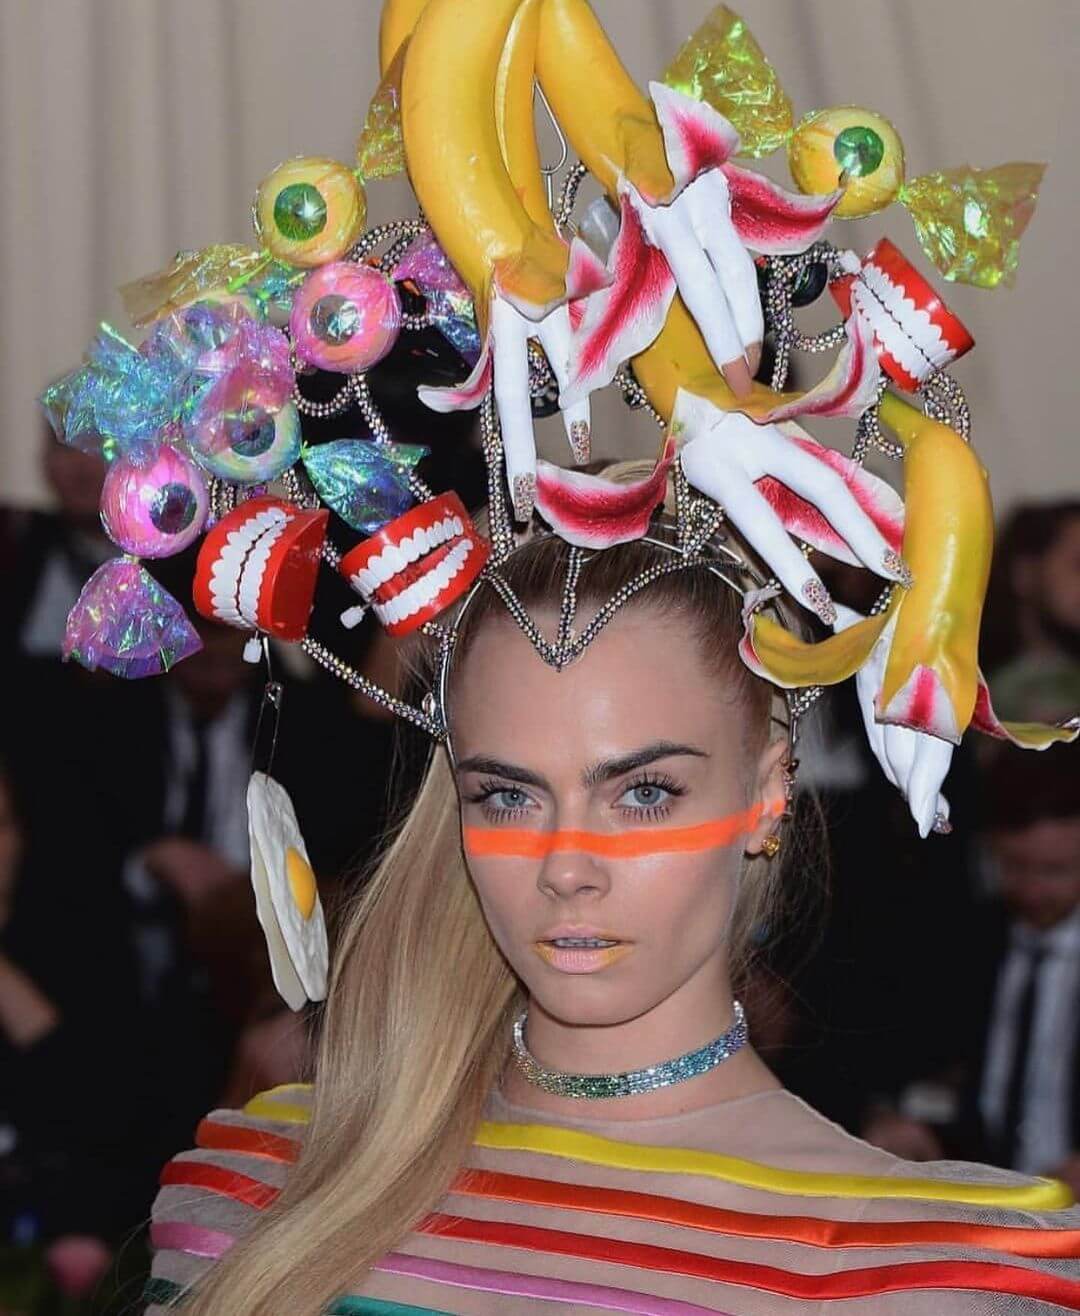 Cara Delevingne Shines at the 2019 Met Gala with Spectacular Rainbow Dior Look and Statement Headdress